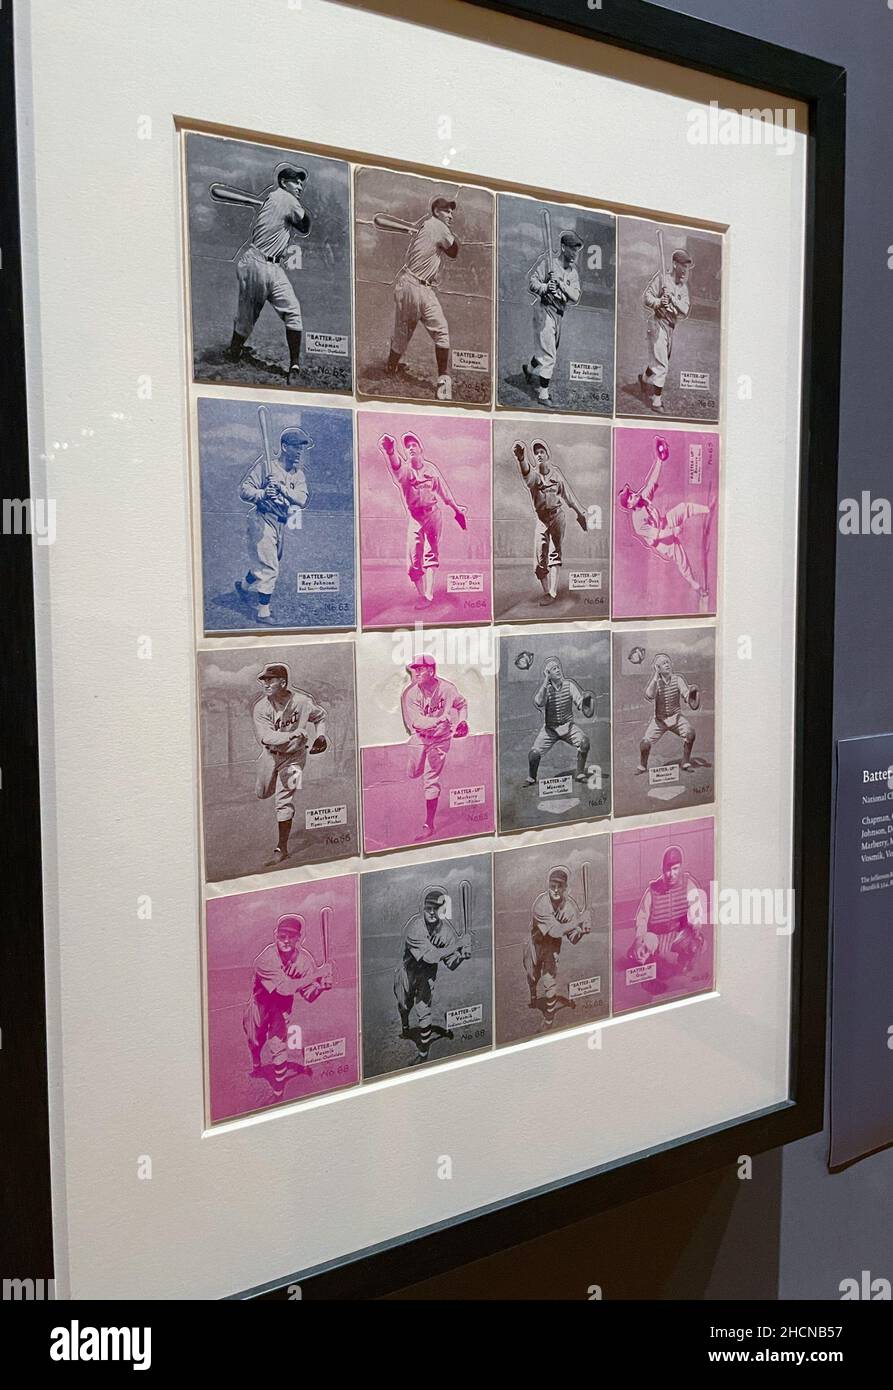 Jefferson R. Burdick Baseball Card Collection at The Metropolitan Museum of Art in New York City, USA  2021 Stock Photo